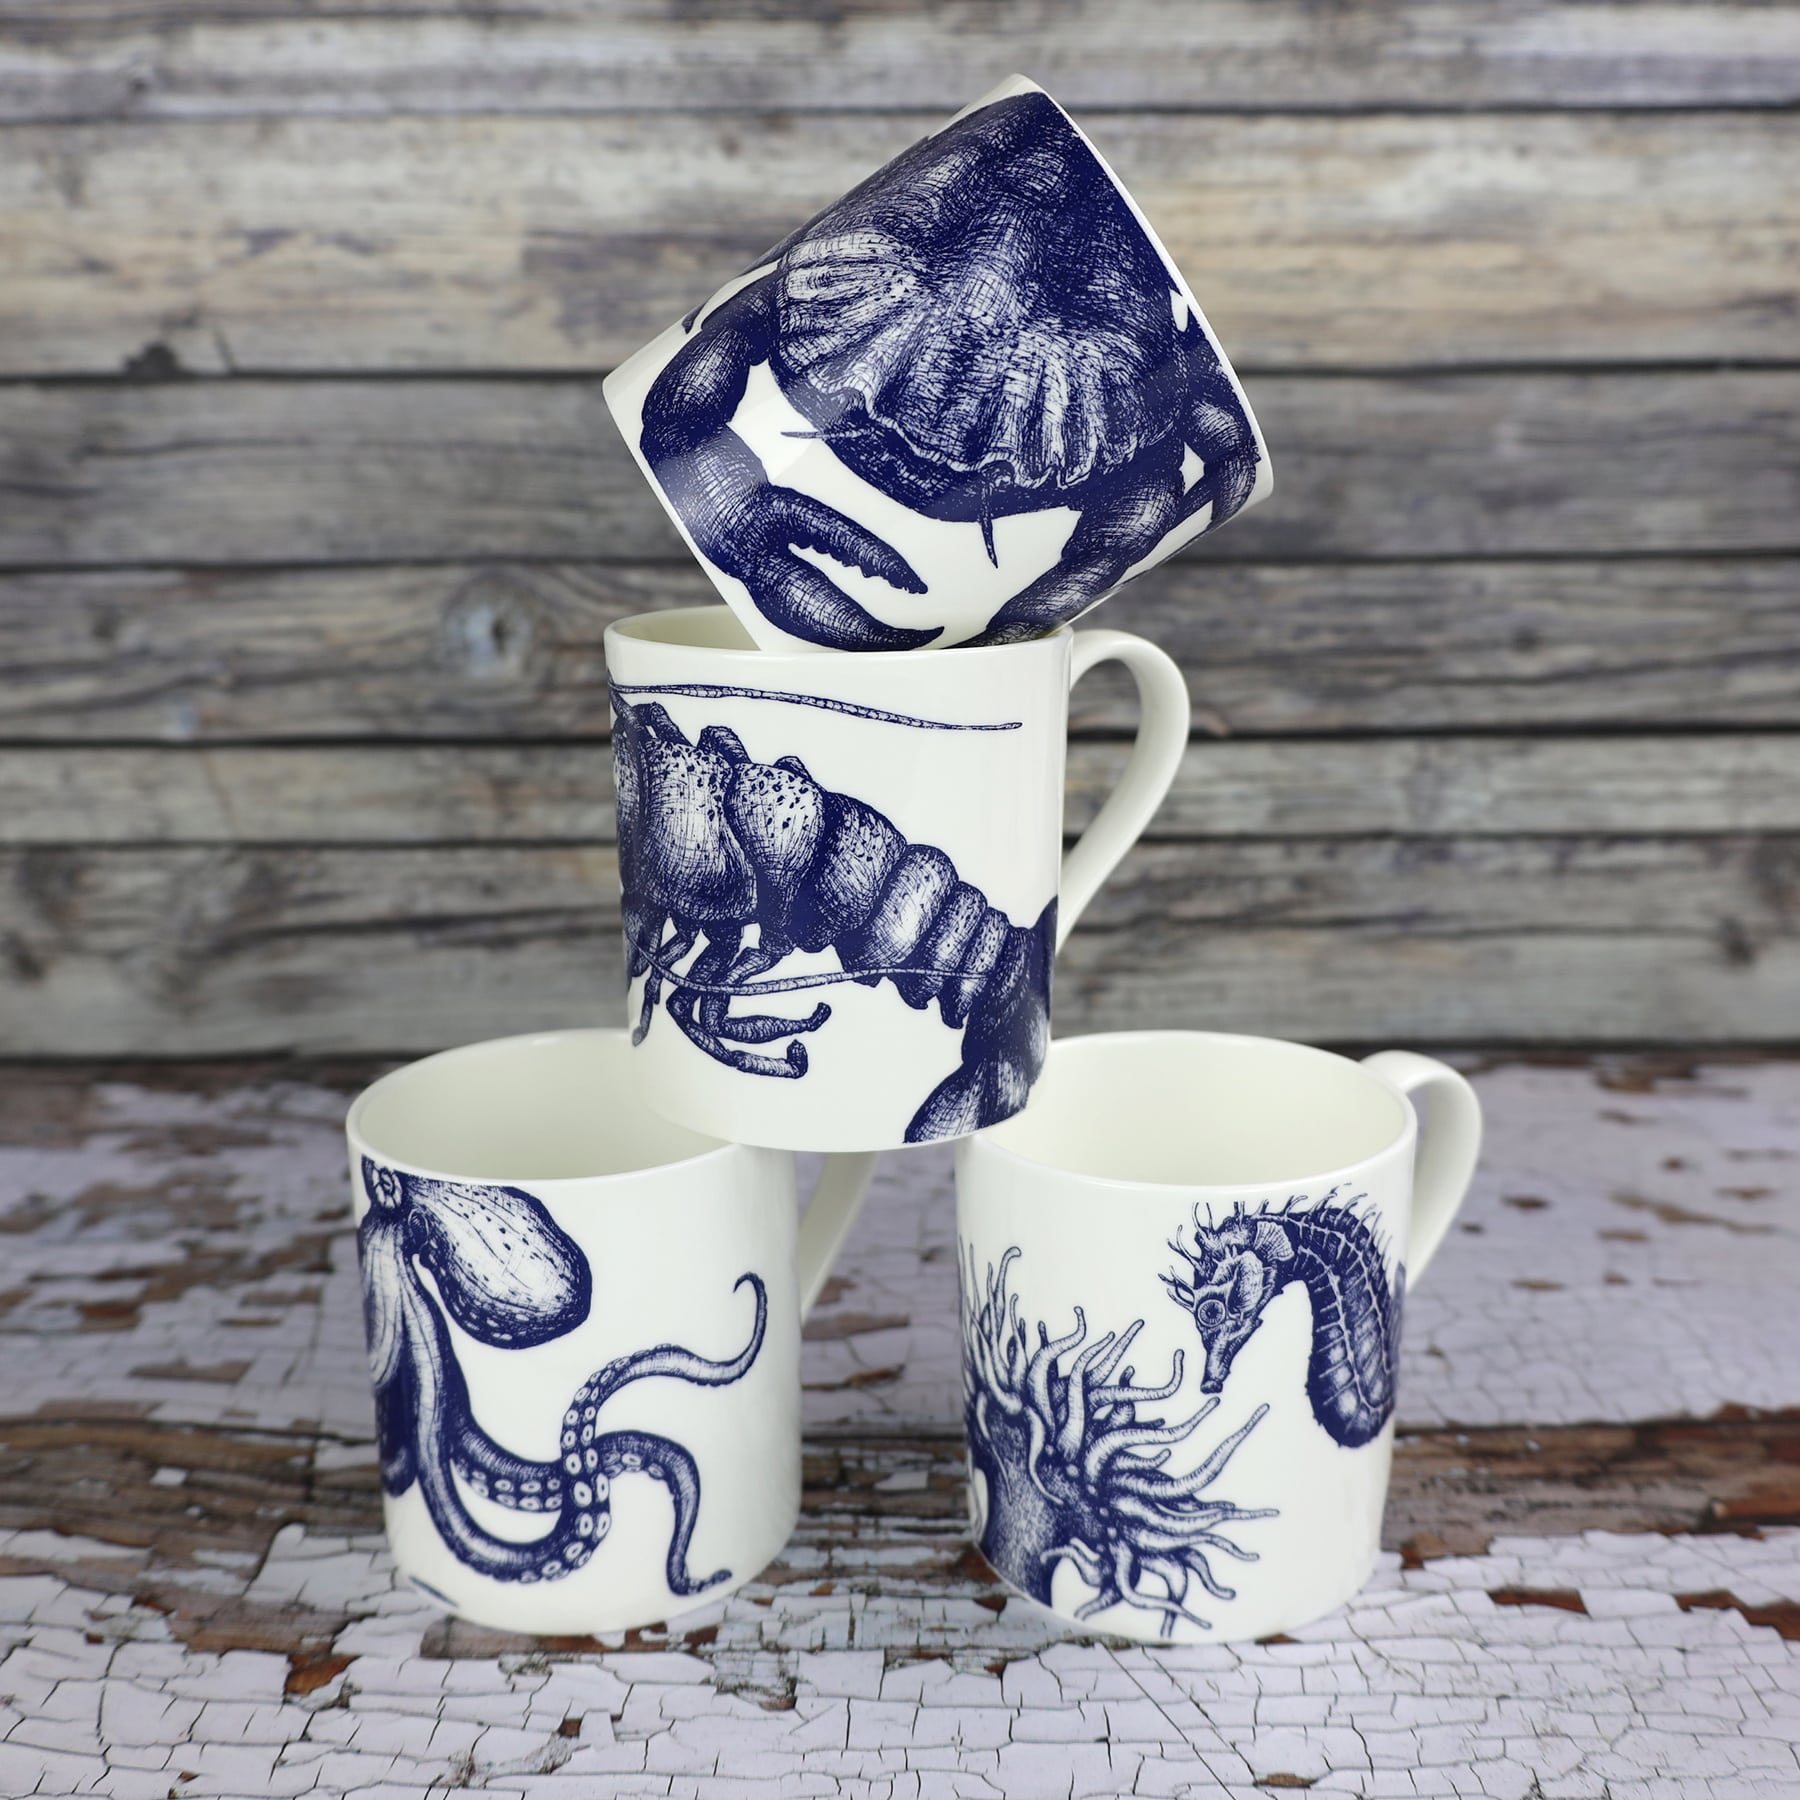 Creature Cups With Lobster~ gray porcelain coffee mug/cup